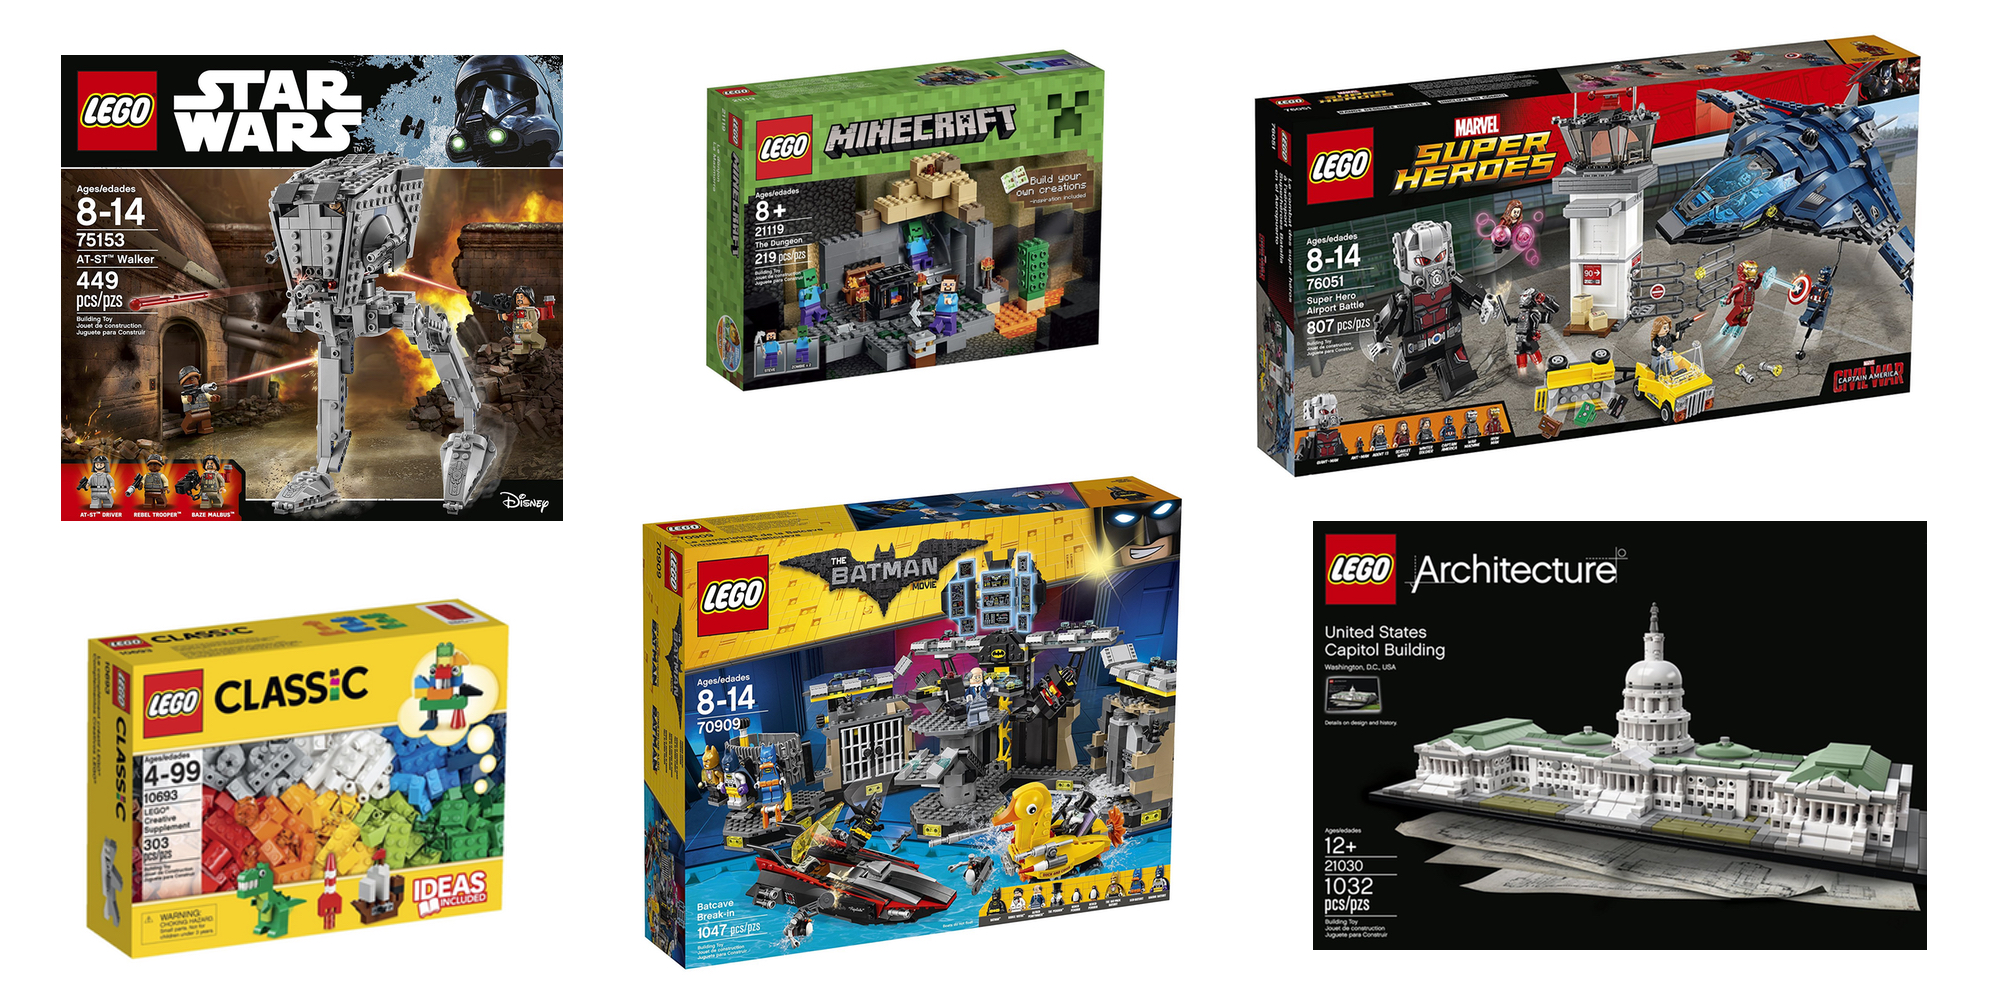 Prime Day assembles discounts on LEGO Star Wars, Minecraft and more from 6